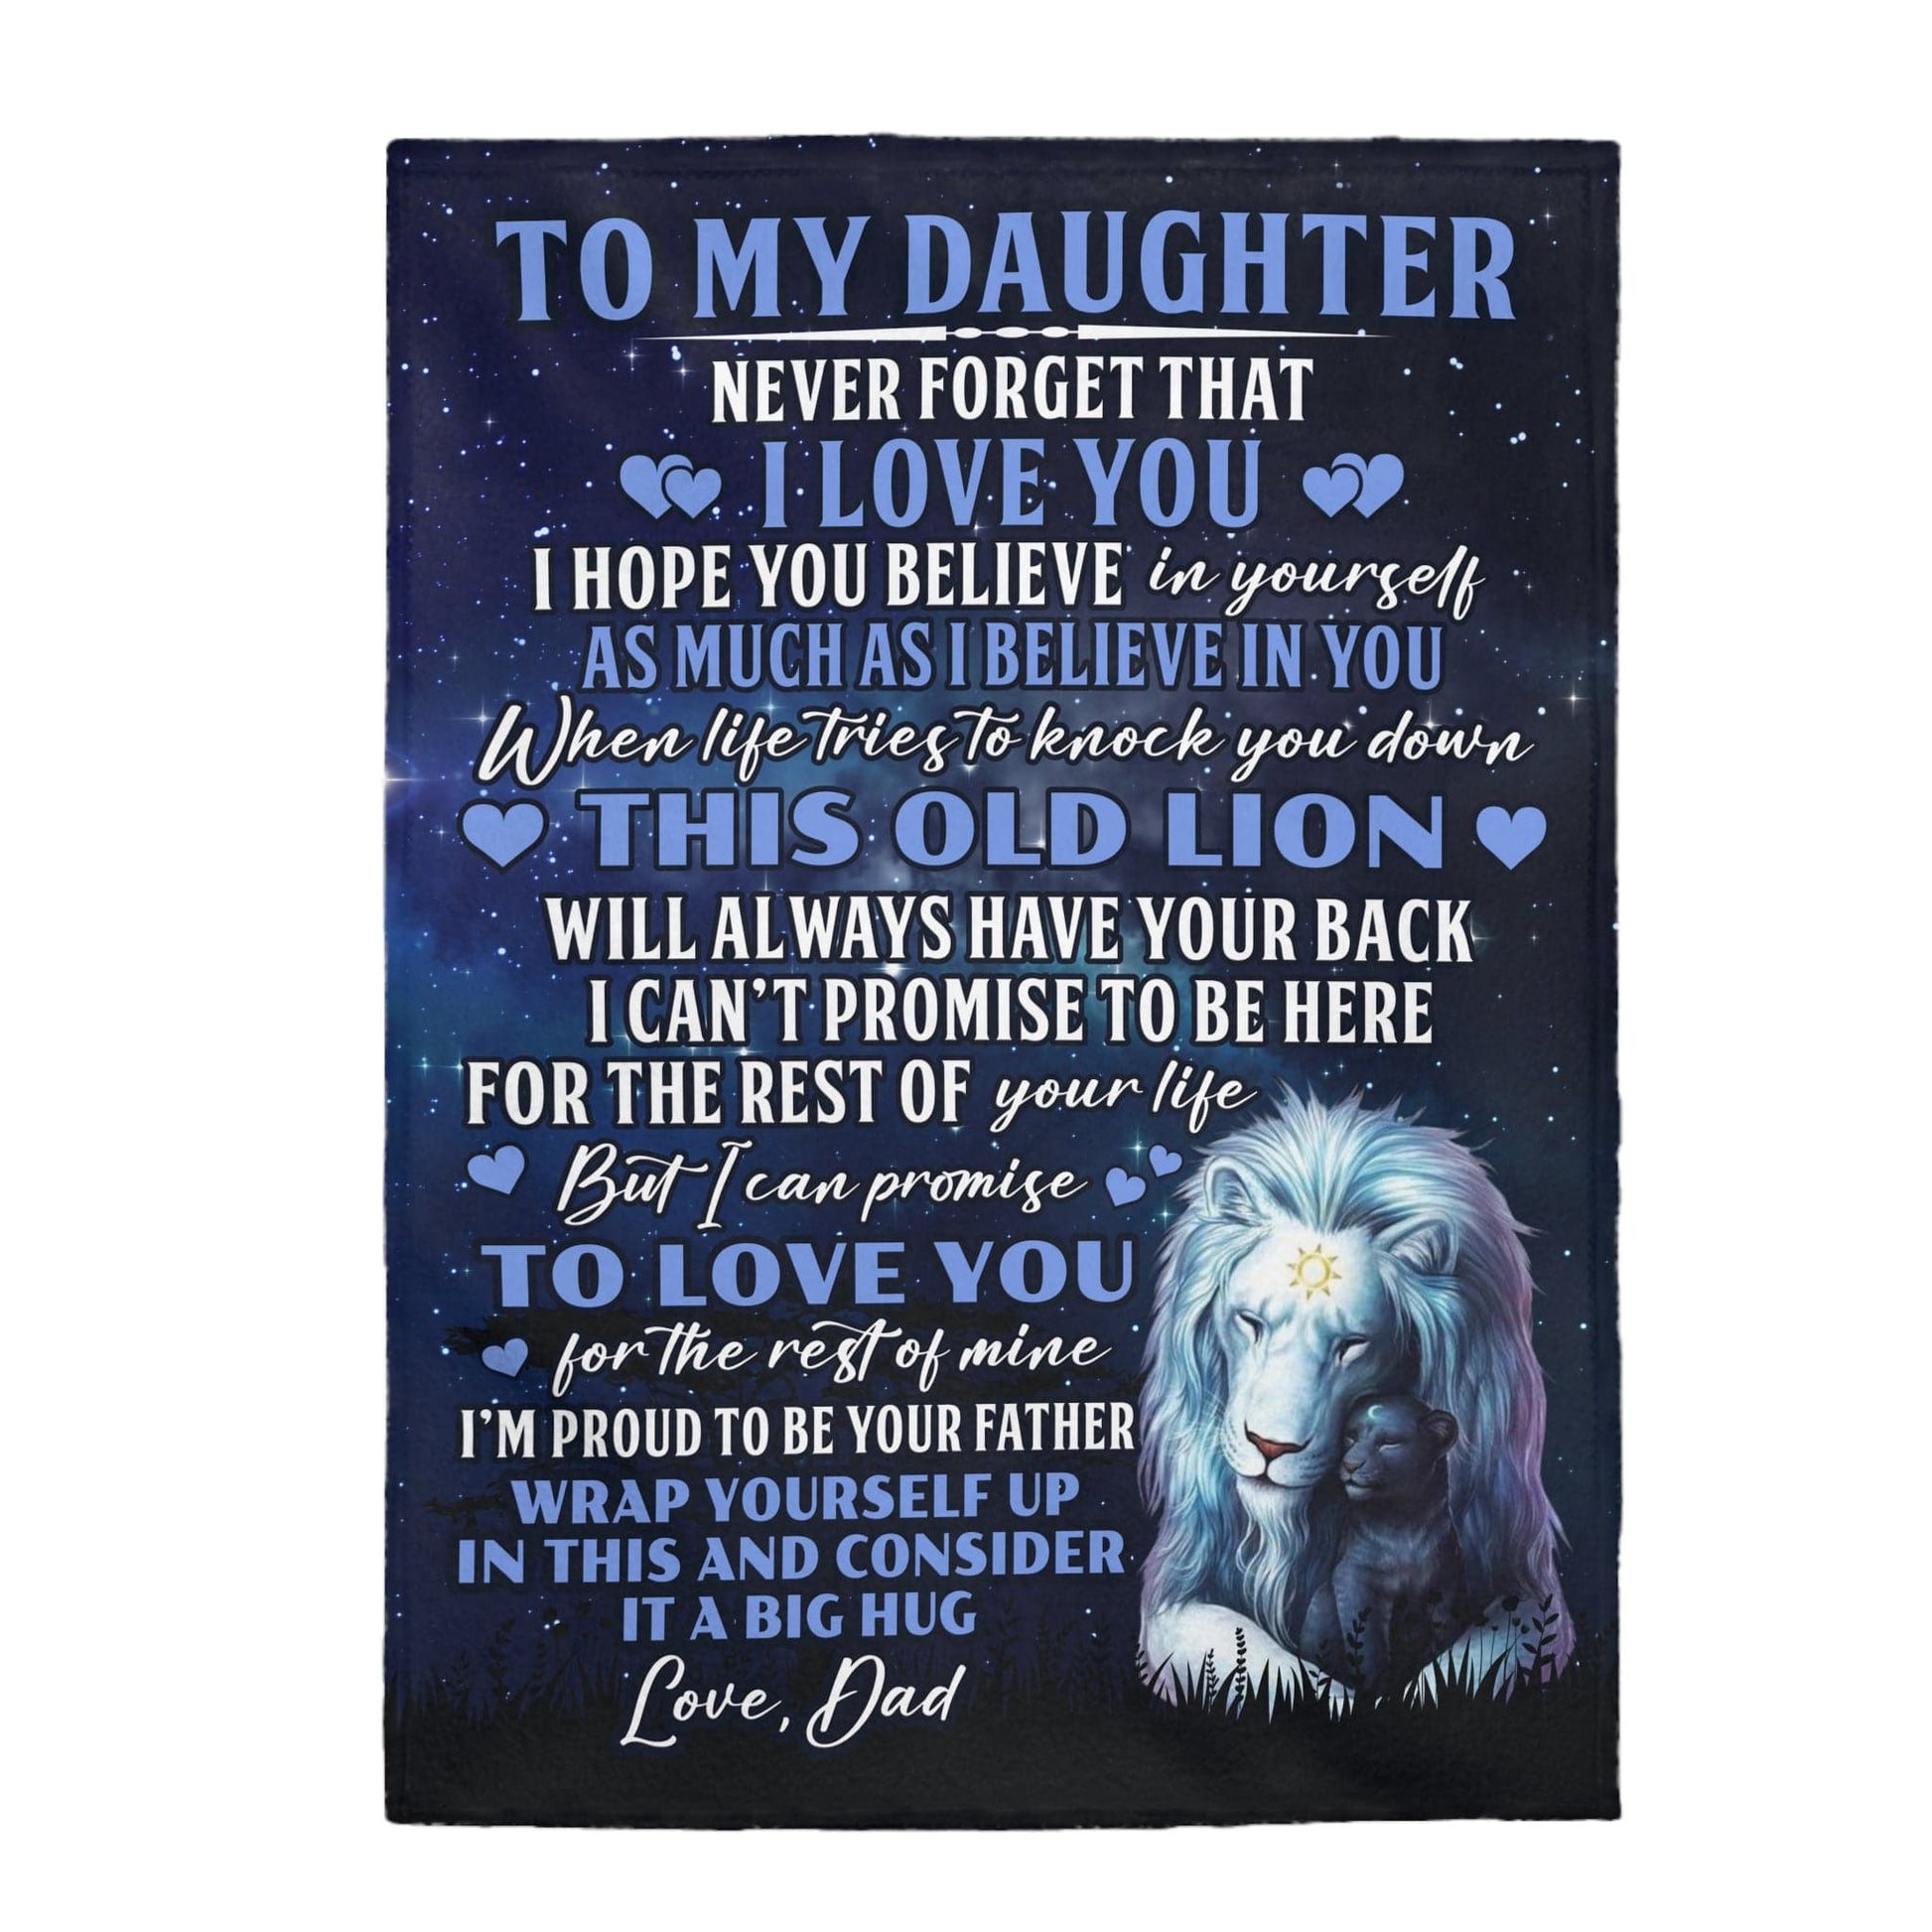 To My Daughter Love Dad - This Old Lion - Cozy Plush Fleece Blanket Gift for Daughter 30"x40"